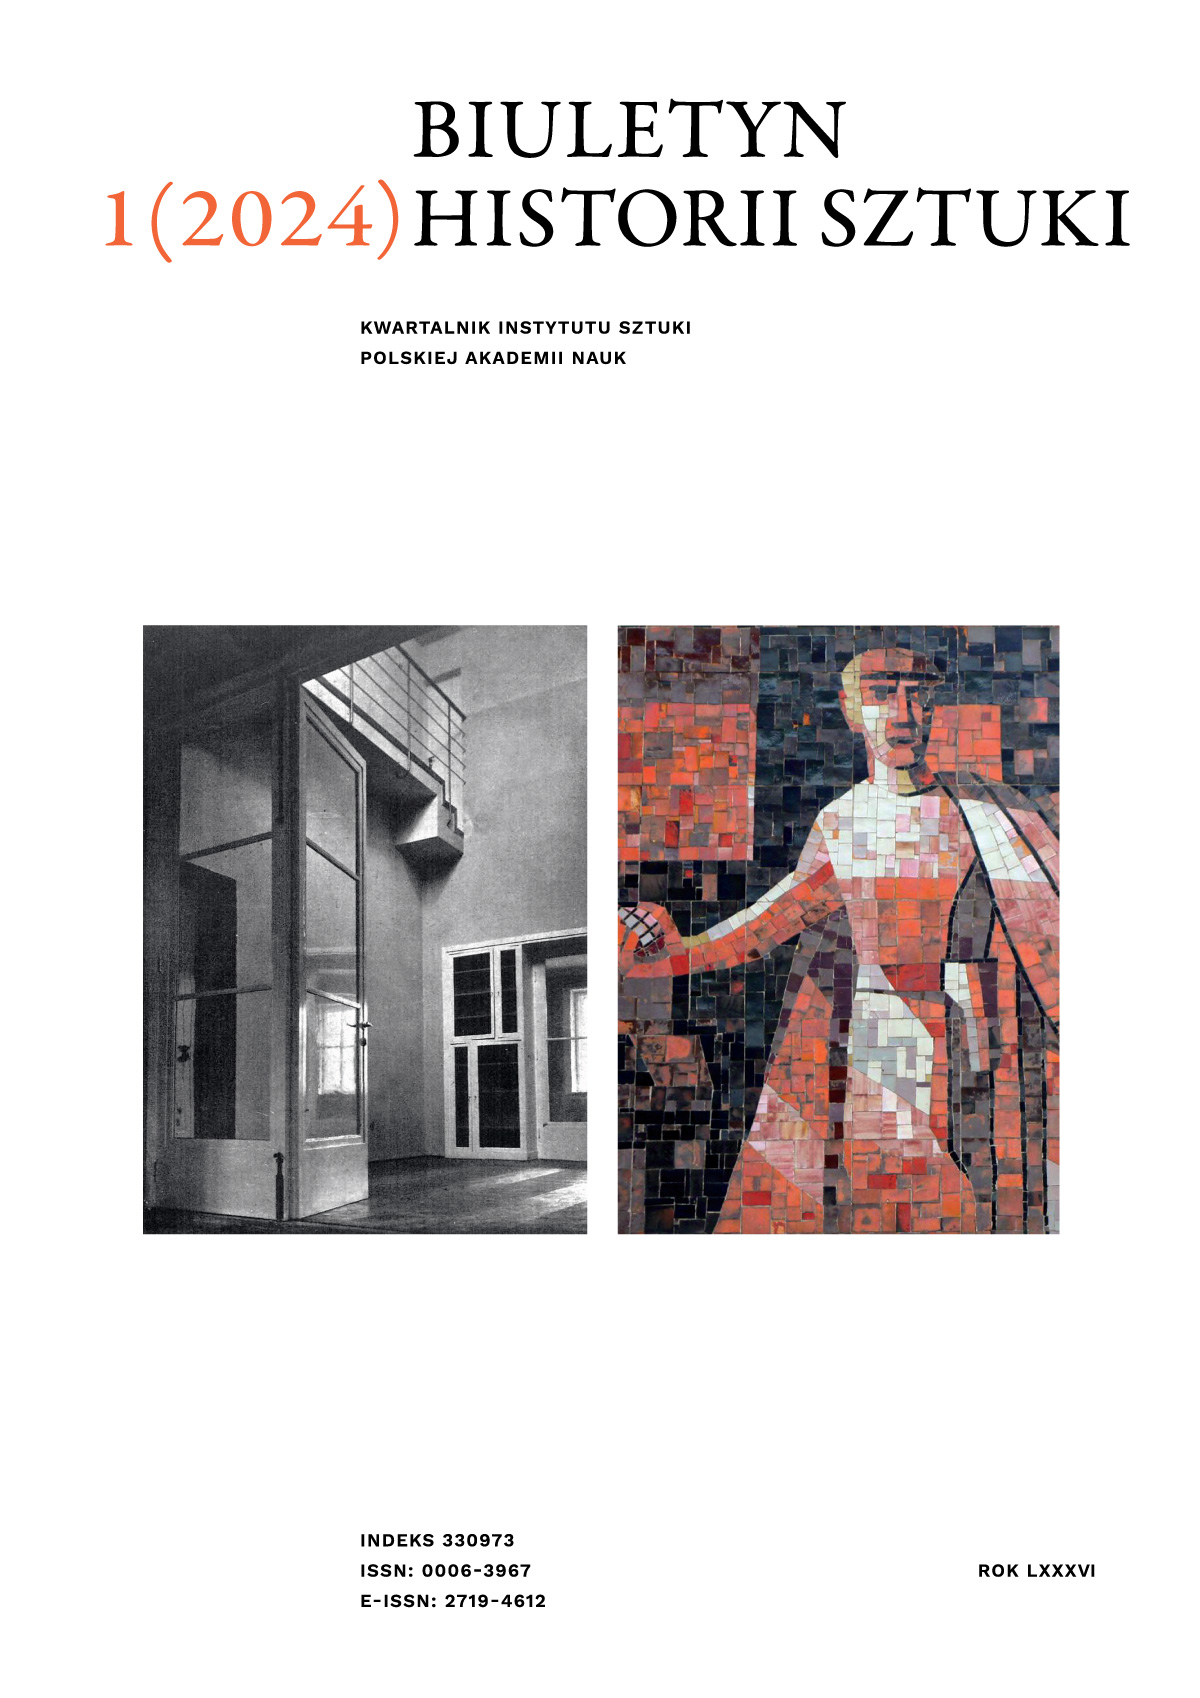 “The Archat the Press and Book Club Building is Waiting for Ornamentation”. The History of the Design and Execution of the Mosaic “The Bombing of Café Club” by Władysław Zych on the Building of the International Press and Book Club in Warsaw Cover Image